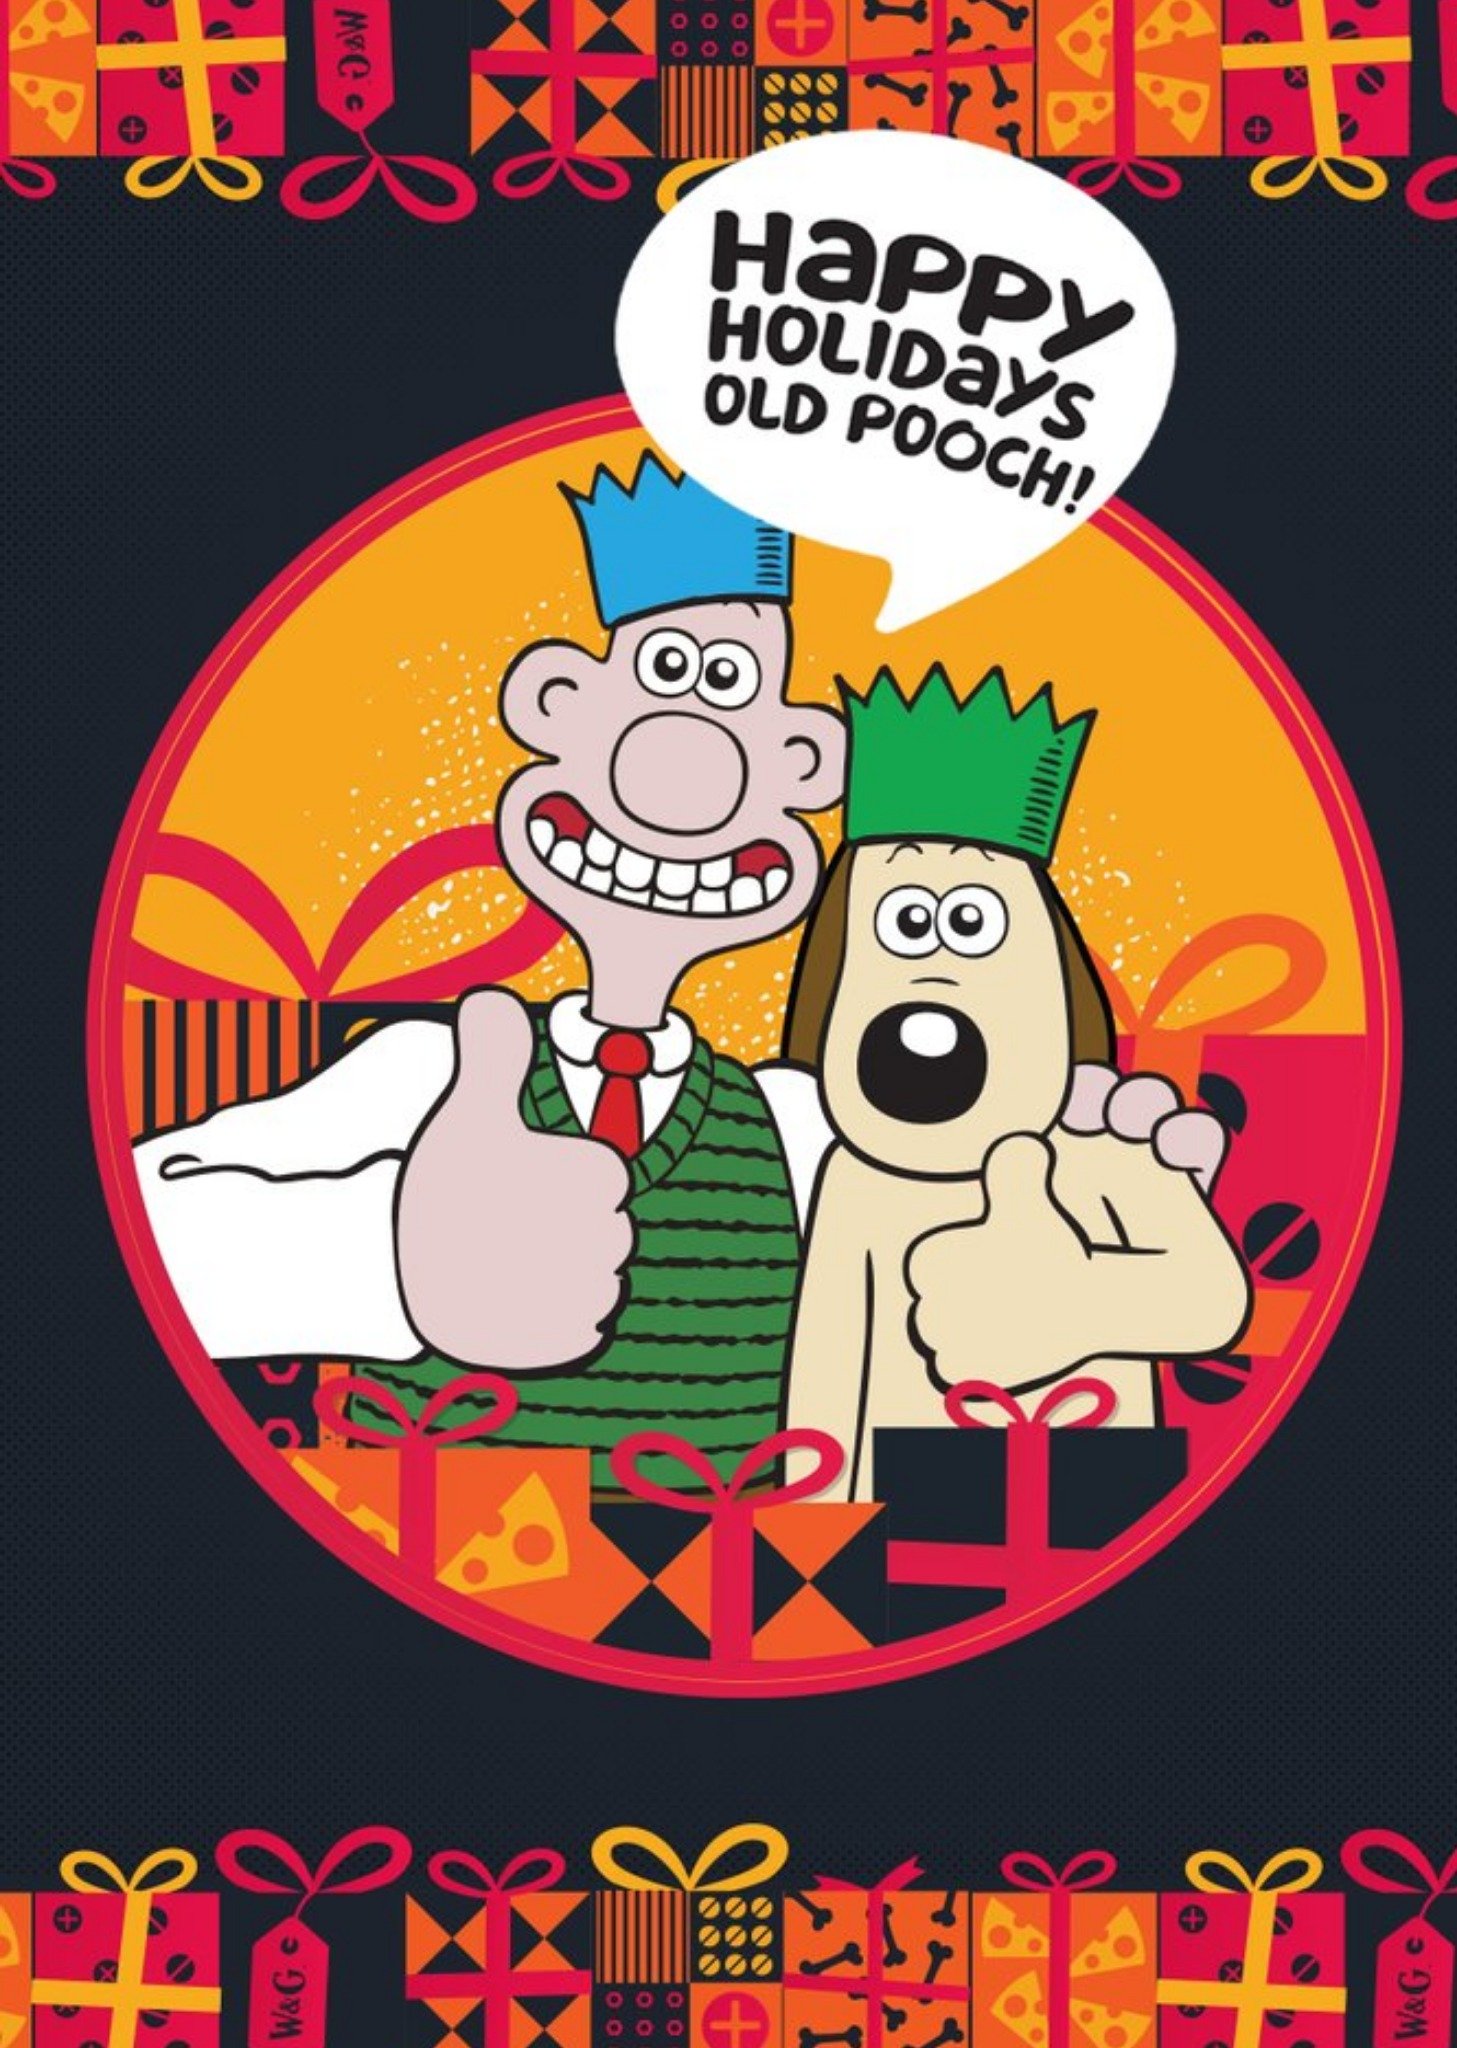 Wallace And Gromit Happy Holidays Old Pooch Christmas Card Ecard